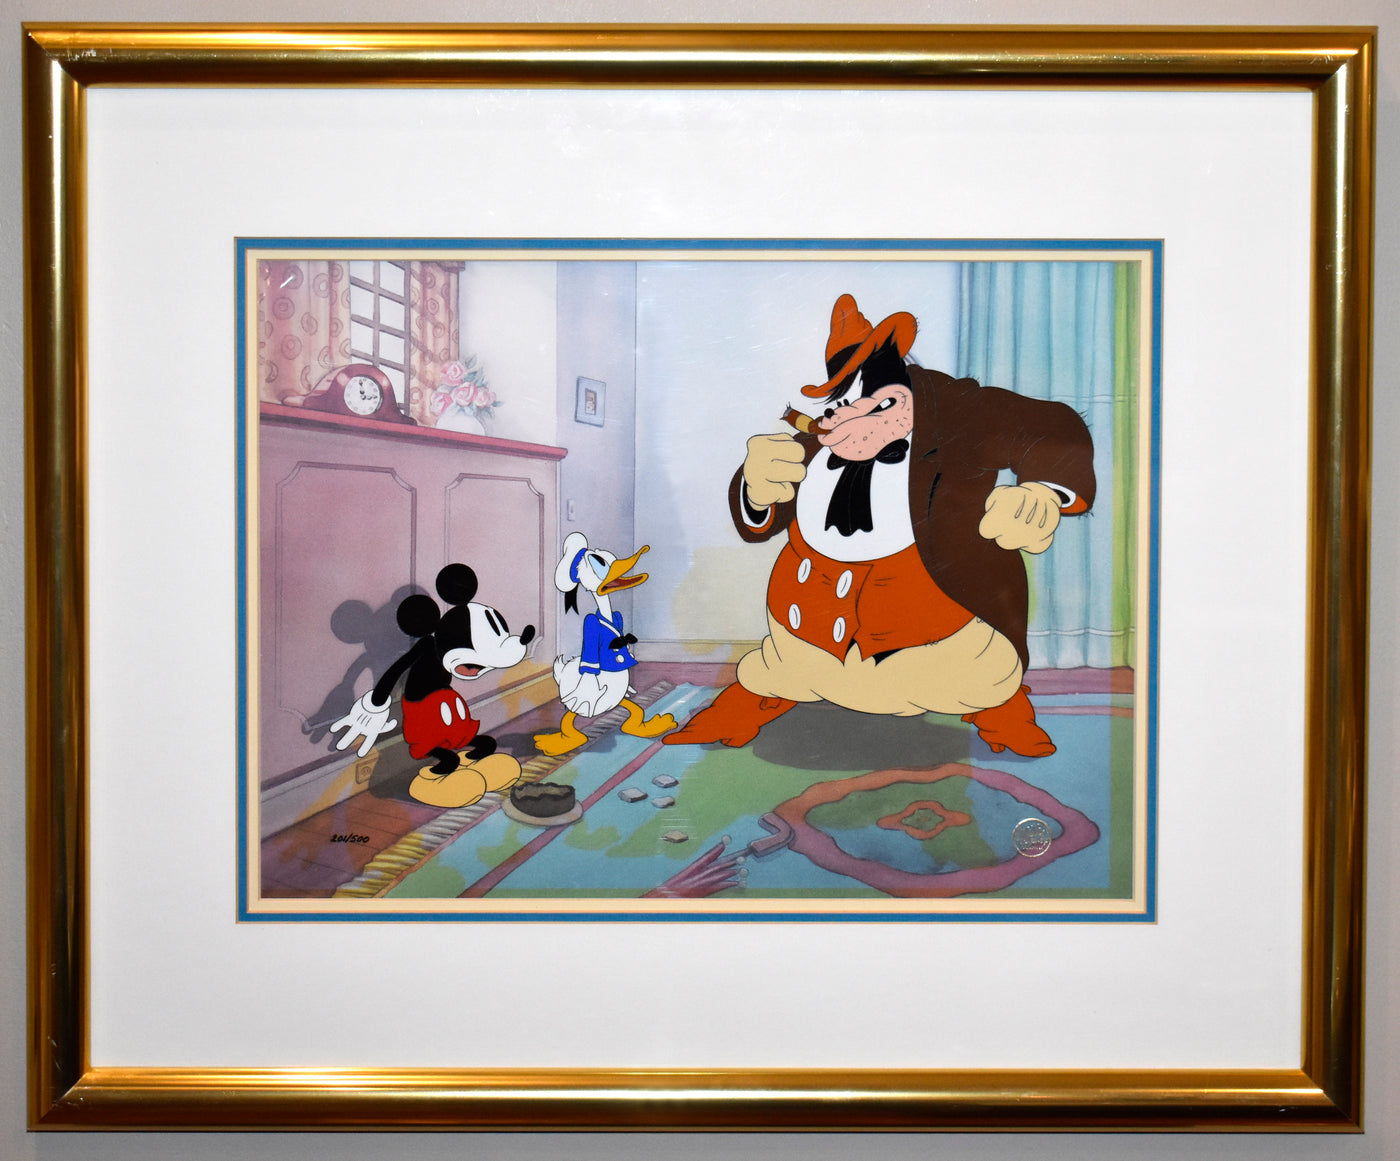 Disney Animation Art Moving Day Limited Edition Cel Featuring Mickey, Pete, and Donald from "Disney Villains Volume I," Signed by Ollie Johnston and Frank Thomas